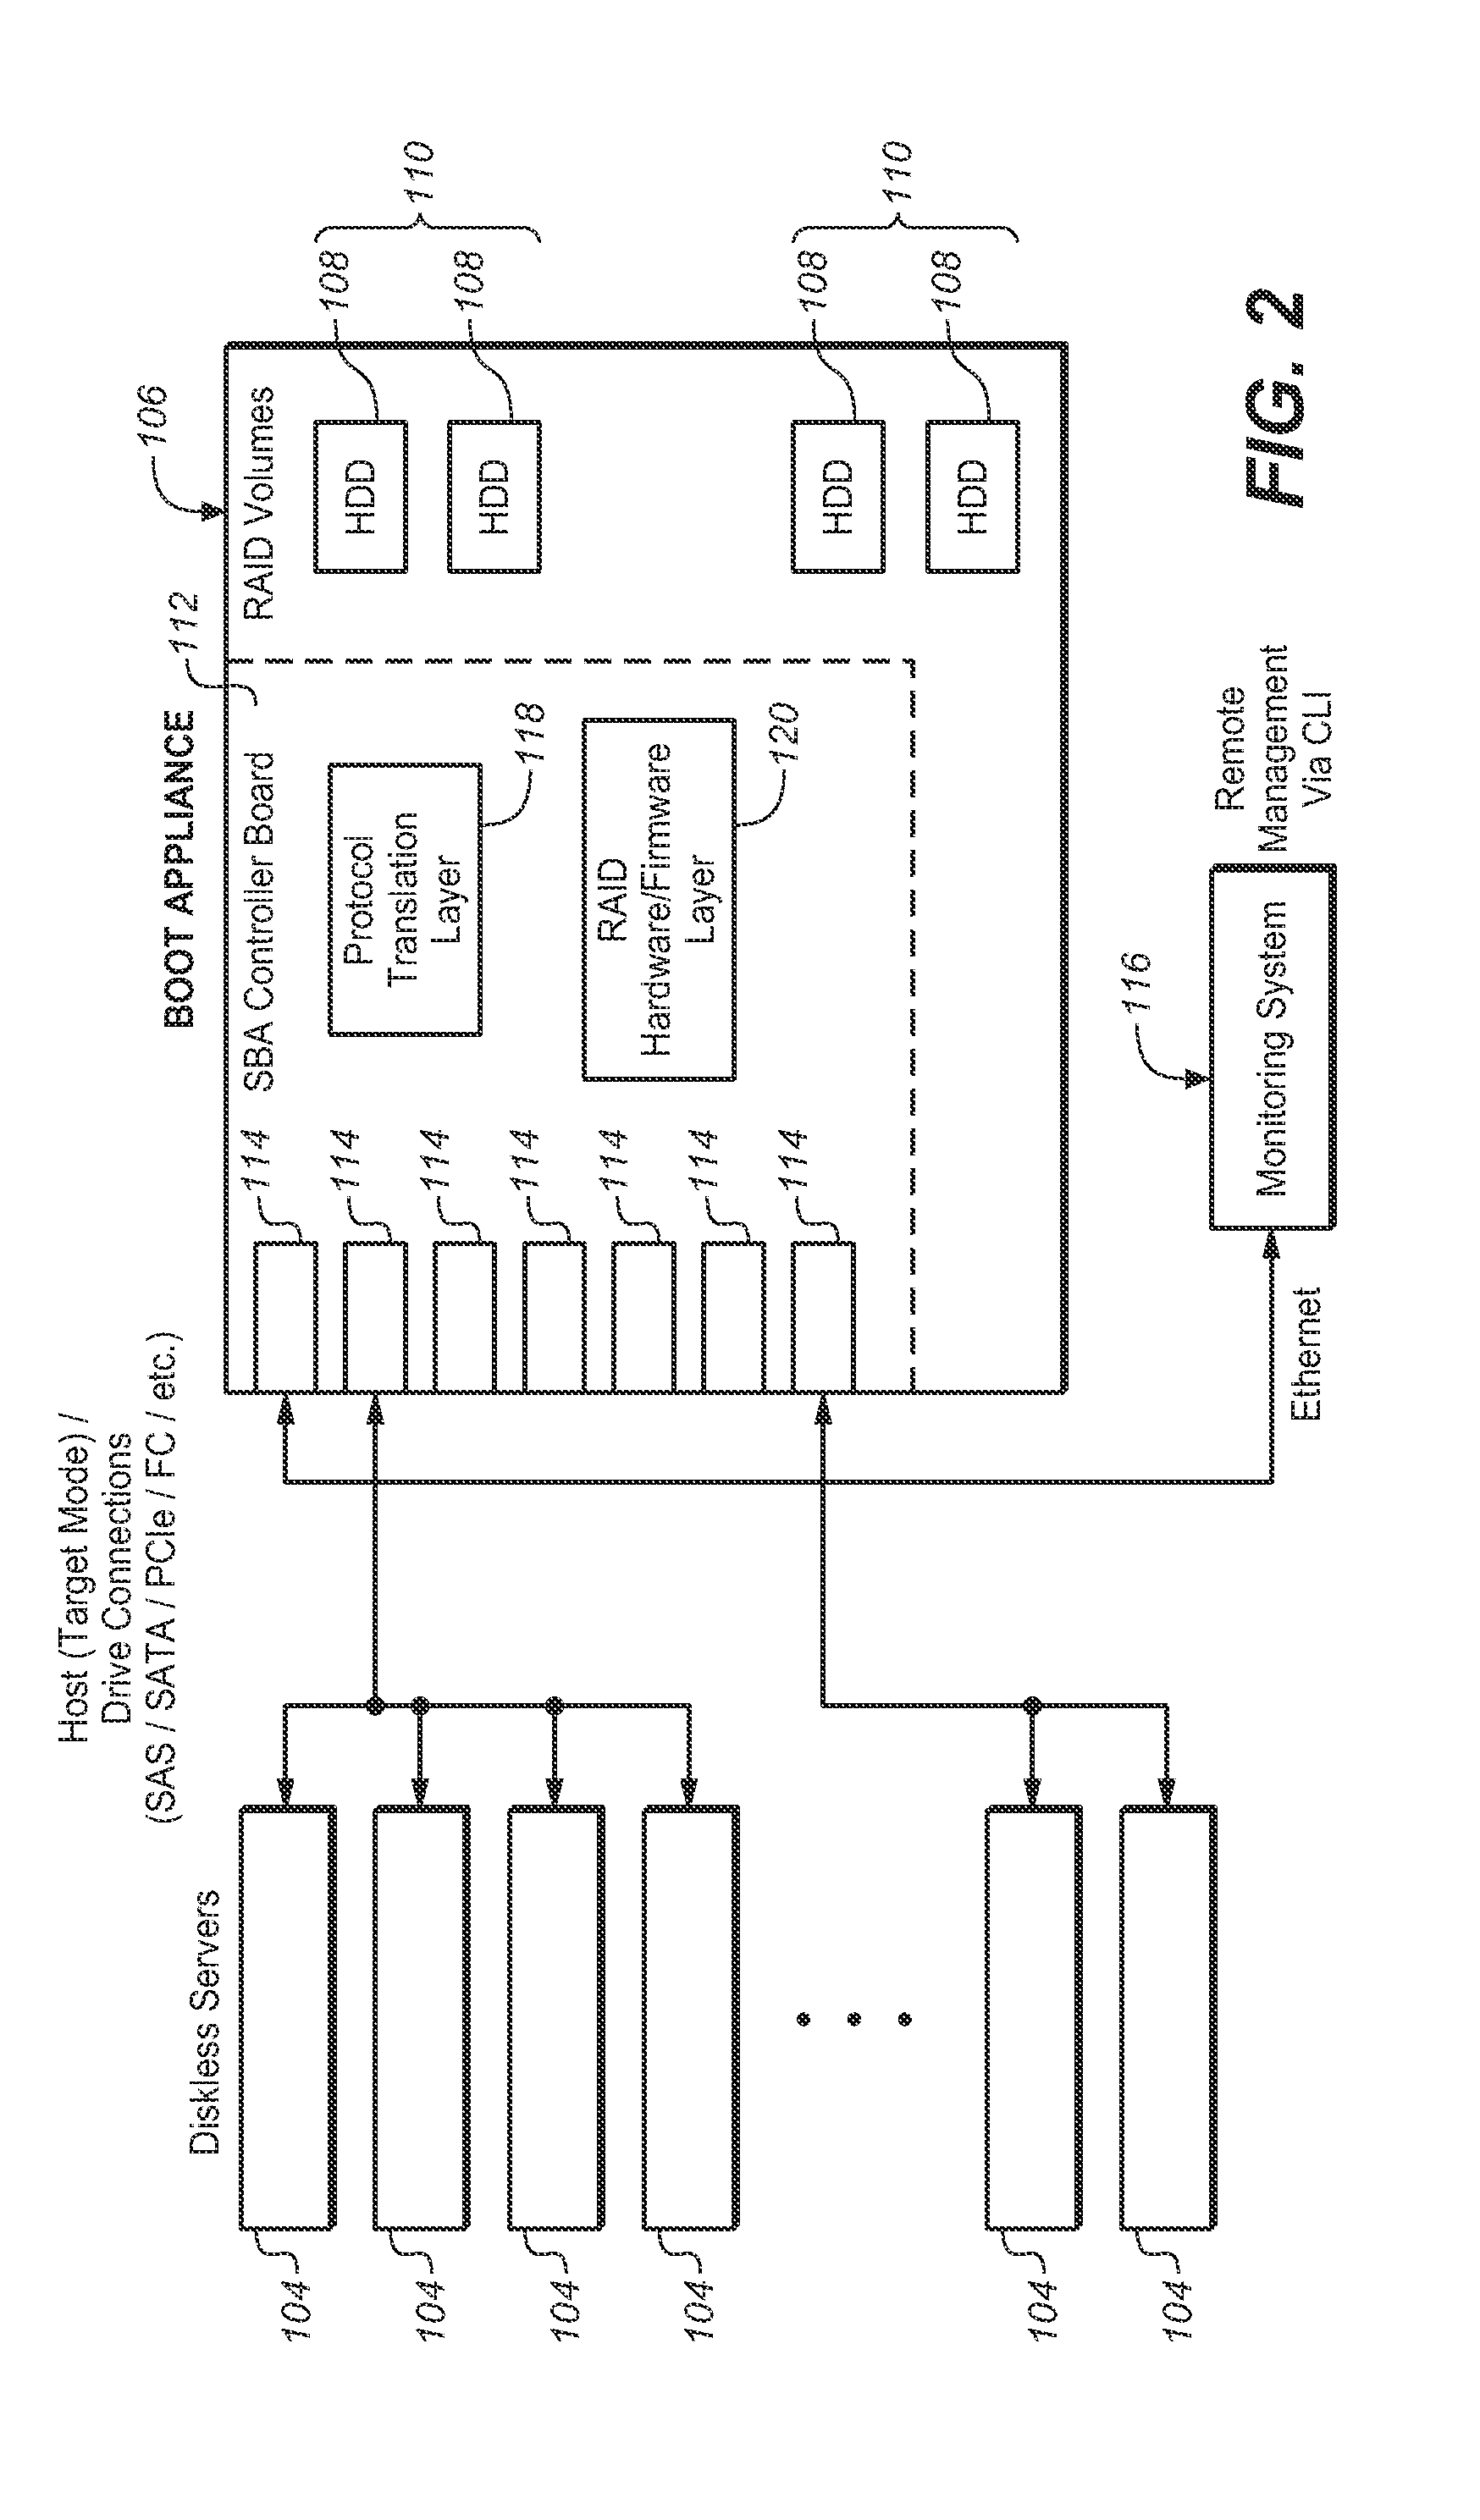 Method and apparatus for consolidating boot drives and improving reliability/availability/serviceability in high density server environments